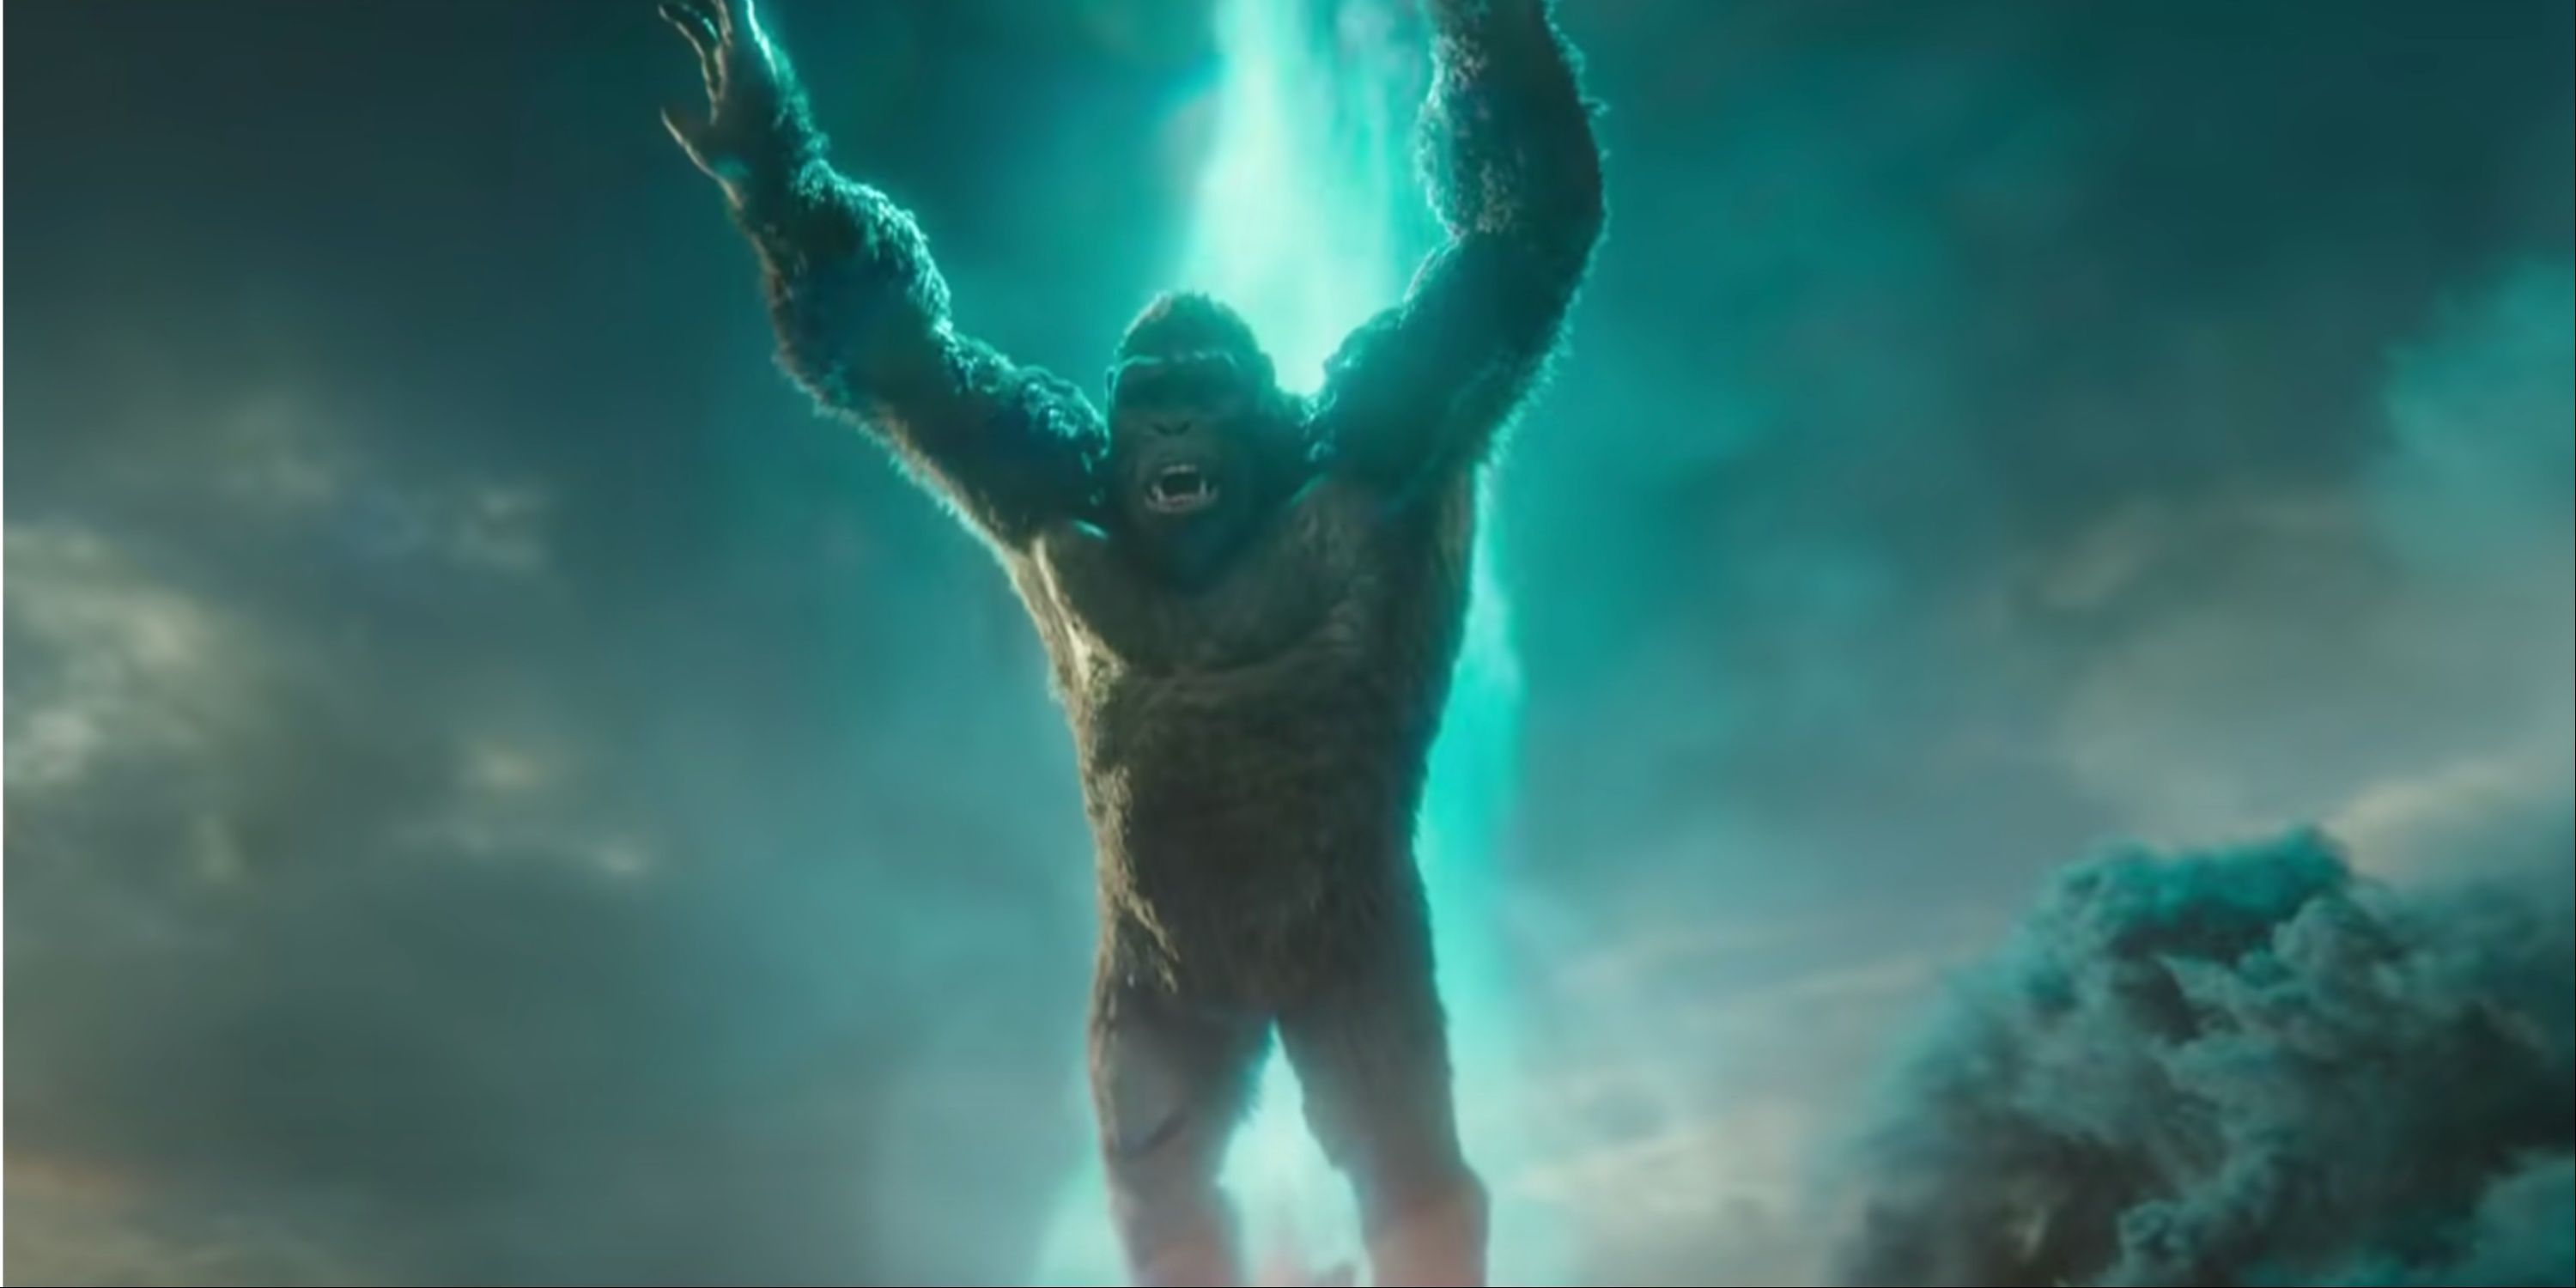 Godzilla vs Kong features Kong greatest conquest yet